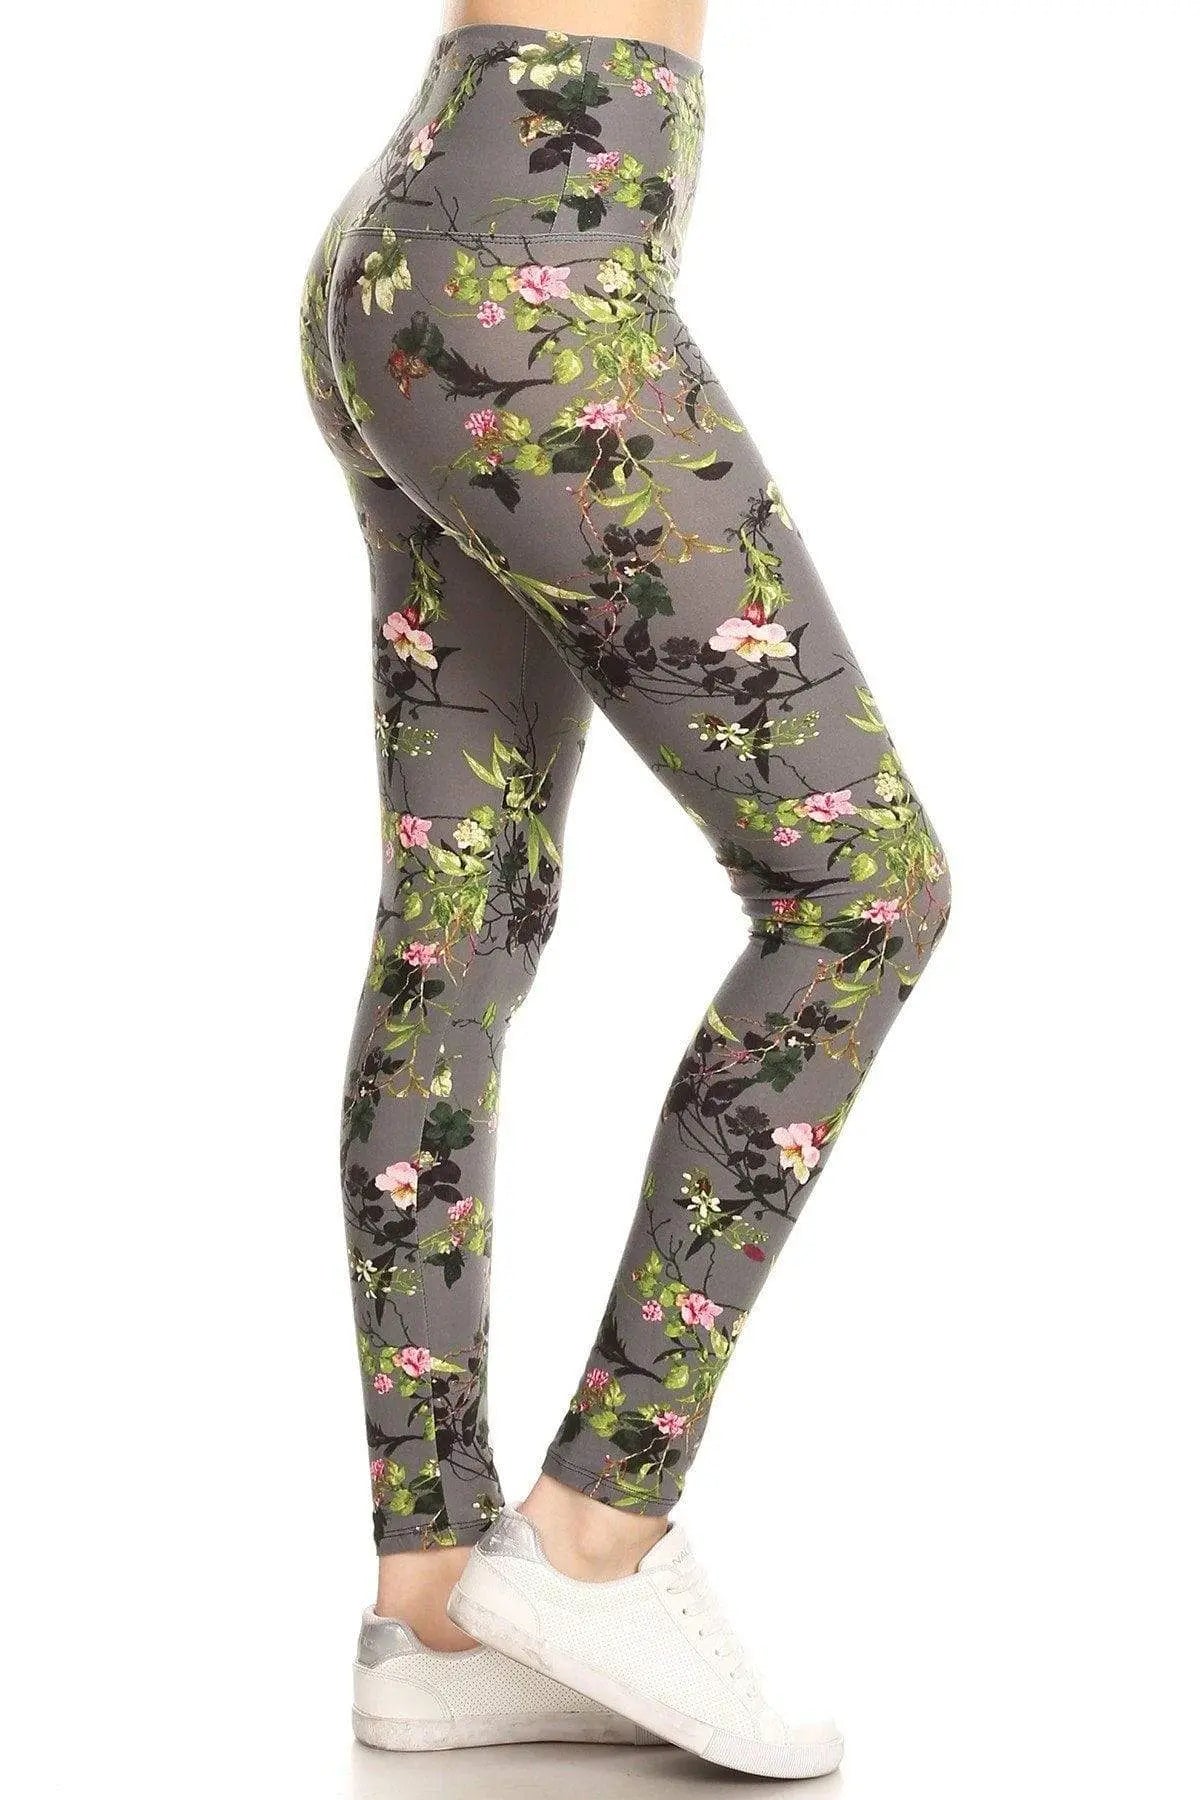 5-inch Long Yoga Style Banded Lined Floral Printed Knit Legging With High Waist Blue Zone Planet